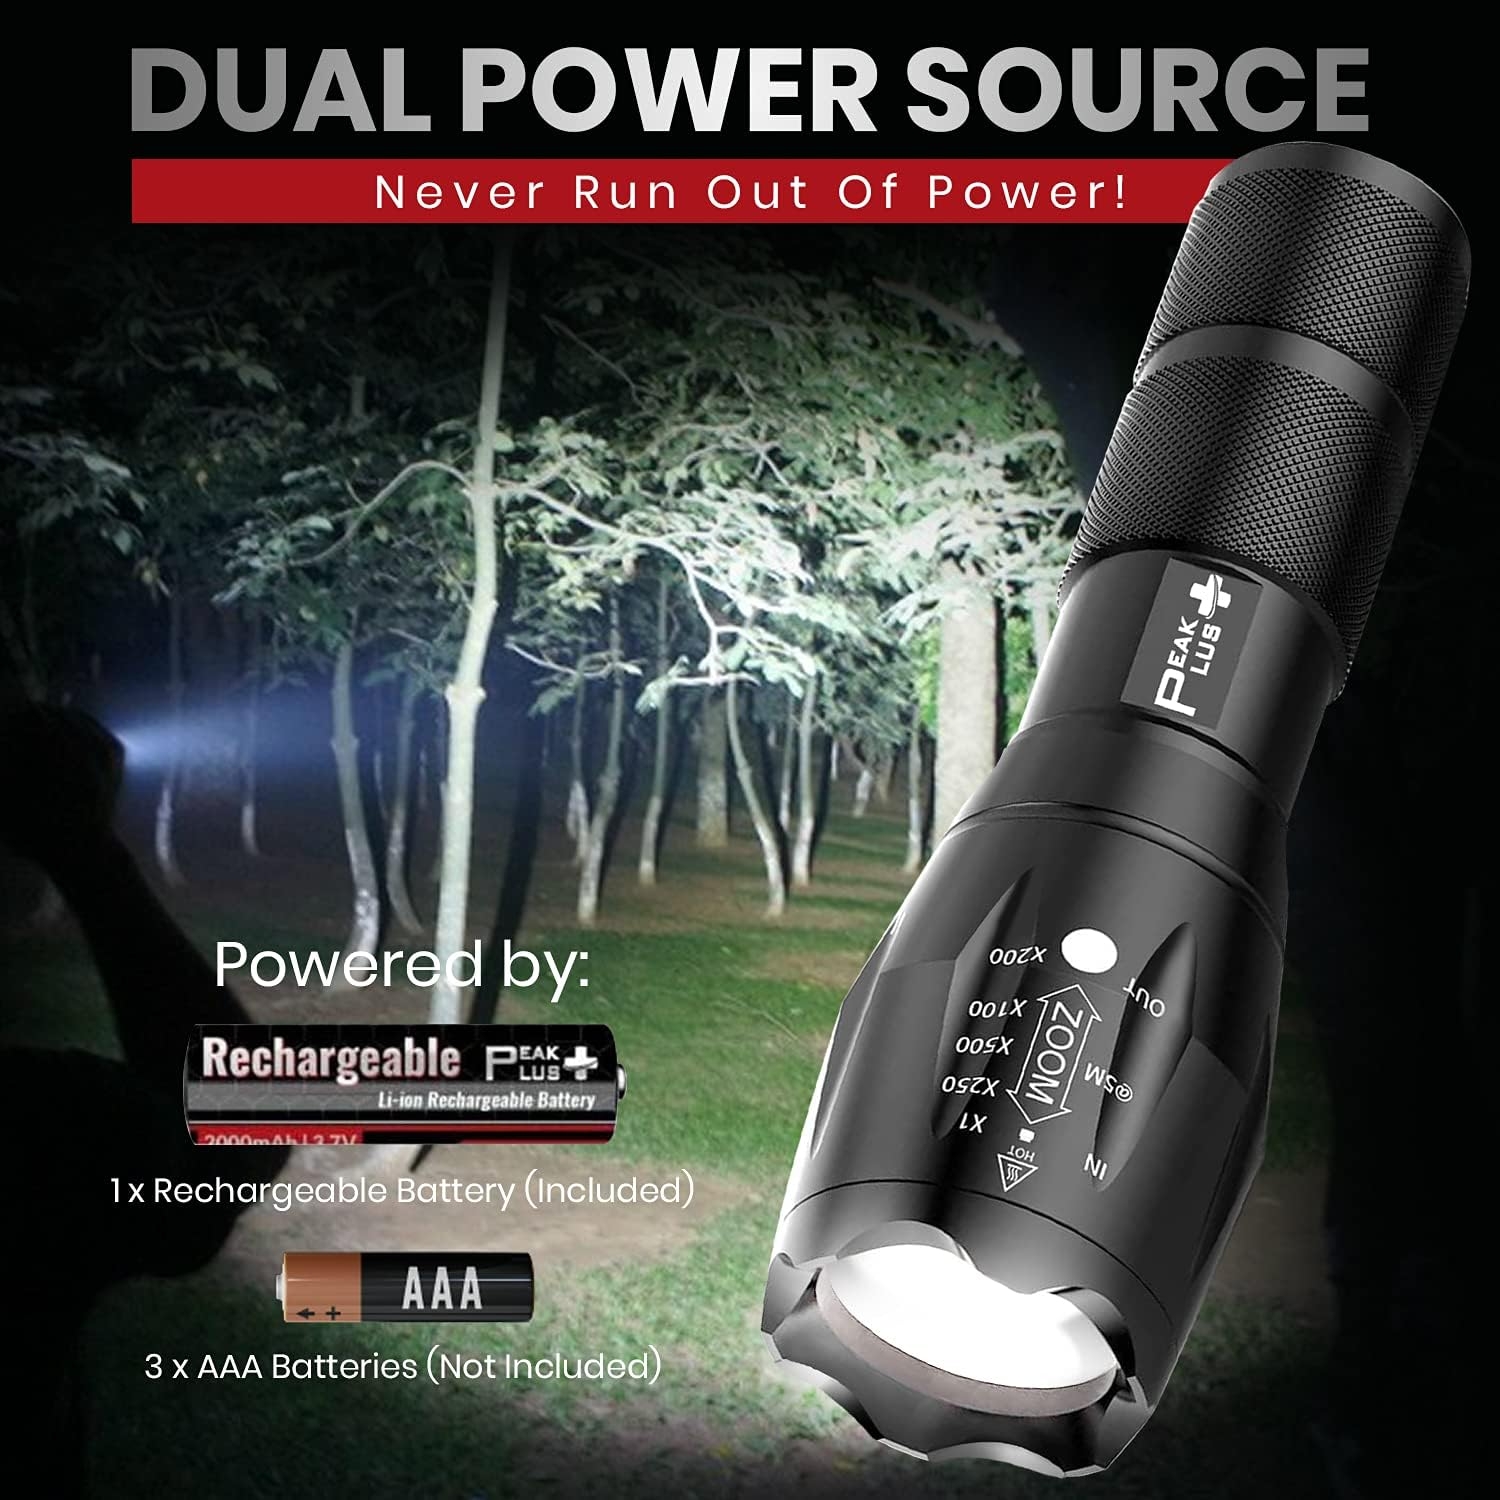 PeakPlus Rechargeable Tactical Flashlight LFX1000 (18650 Battery and Charger Included) - High Lumens LED, Super Bright, Zoomable, 5 Modes, Water Resistant - Best Camping, Emergency Flashlights